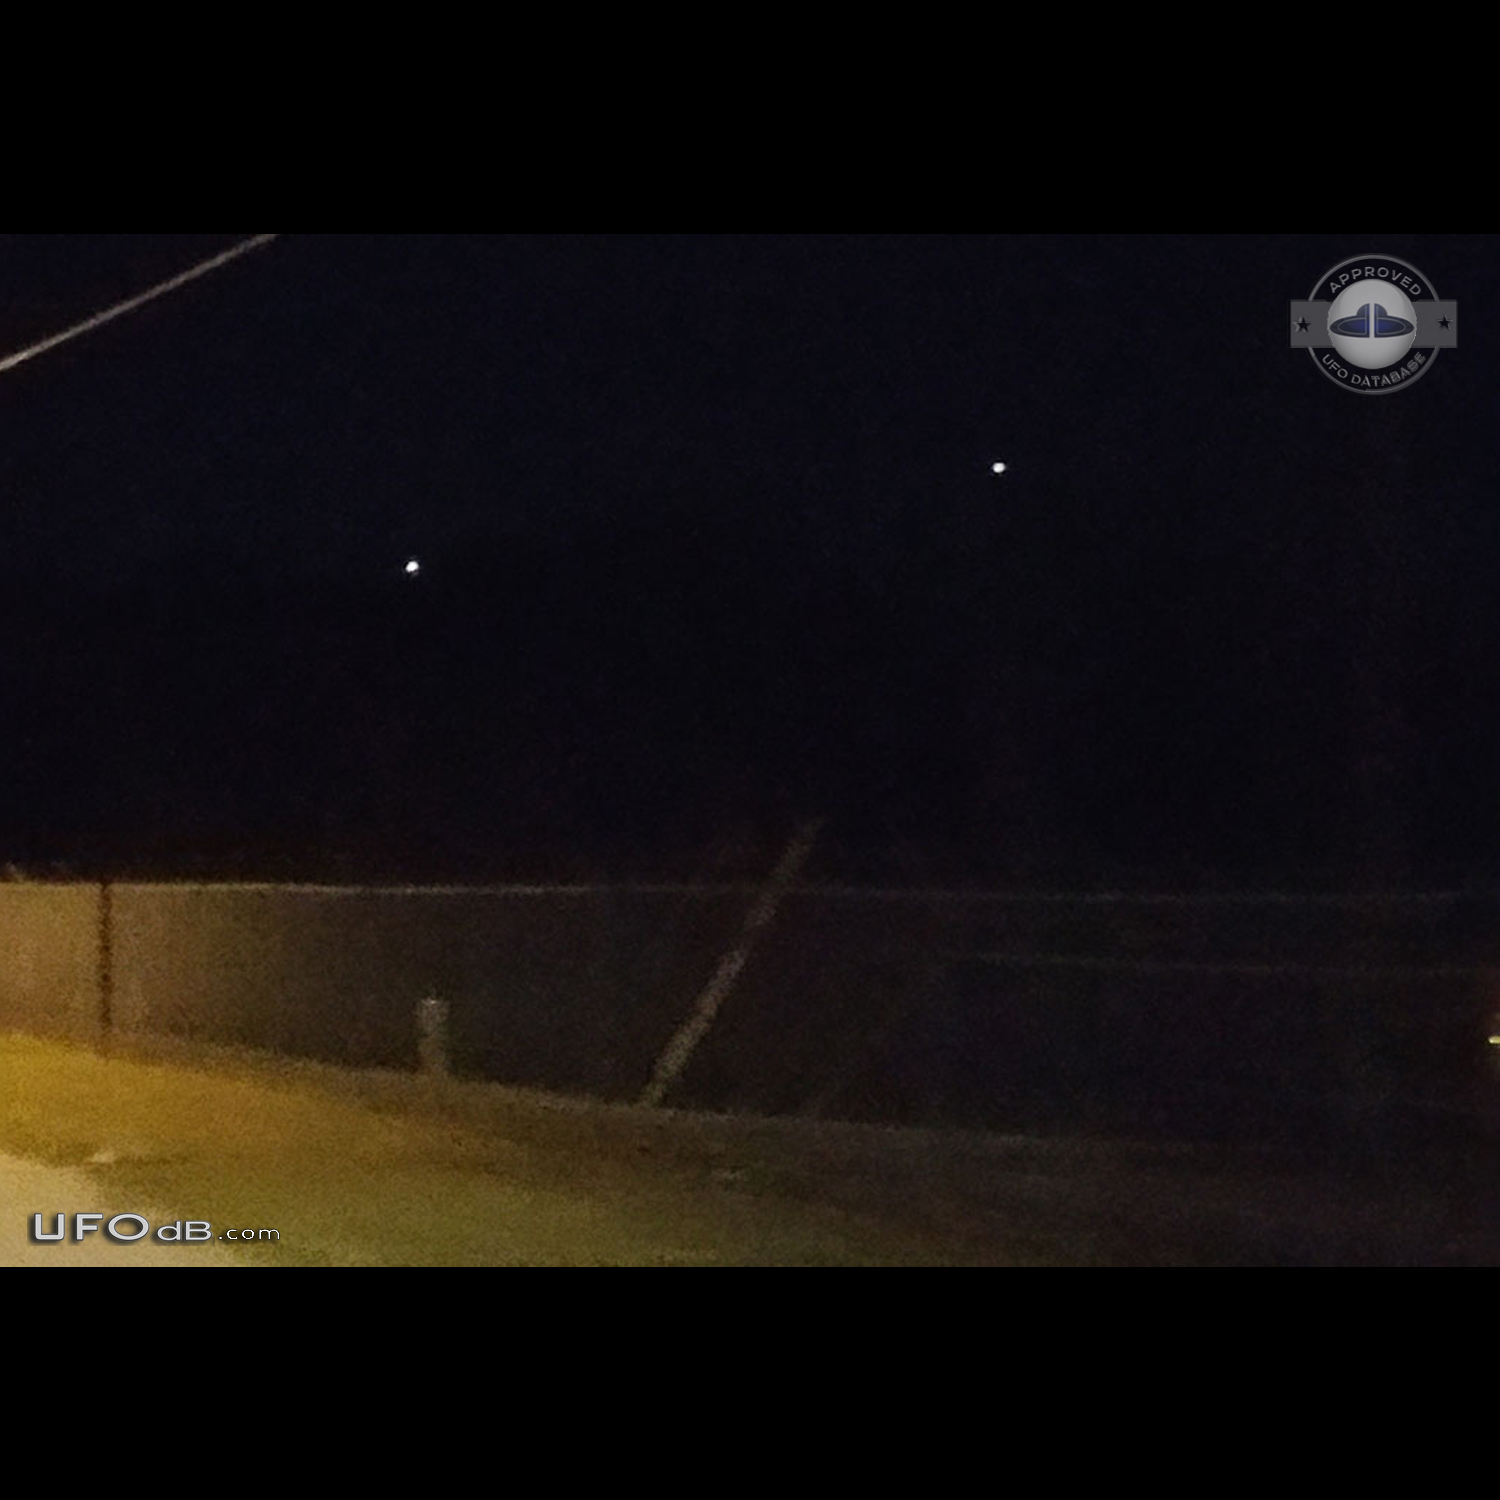 Me and coworker driving and saw the UFOs - Saint Cloud Florida USA 201 UFO Picture #780-3